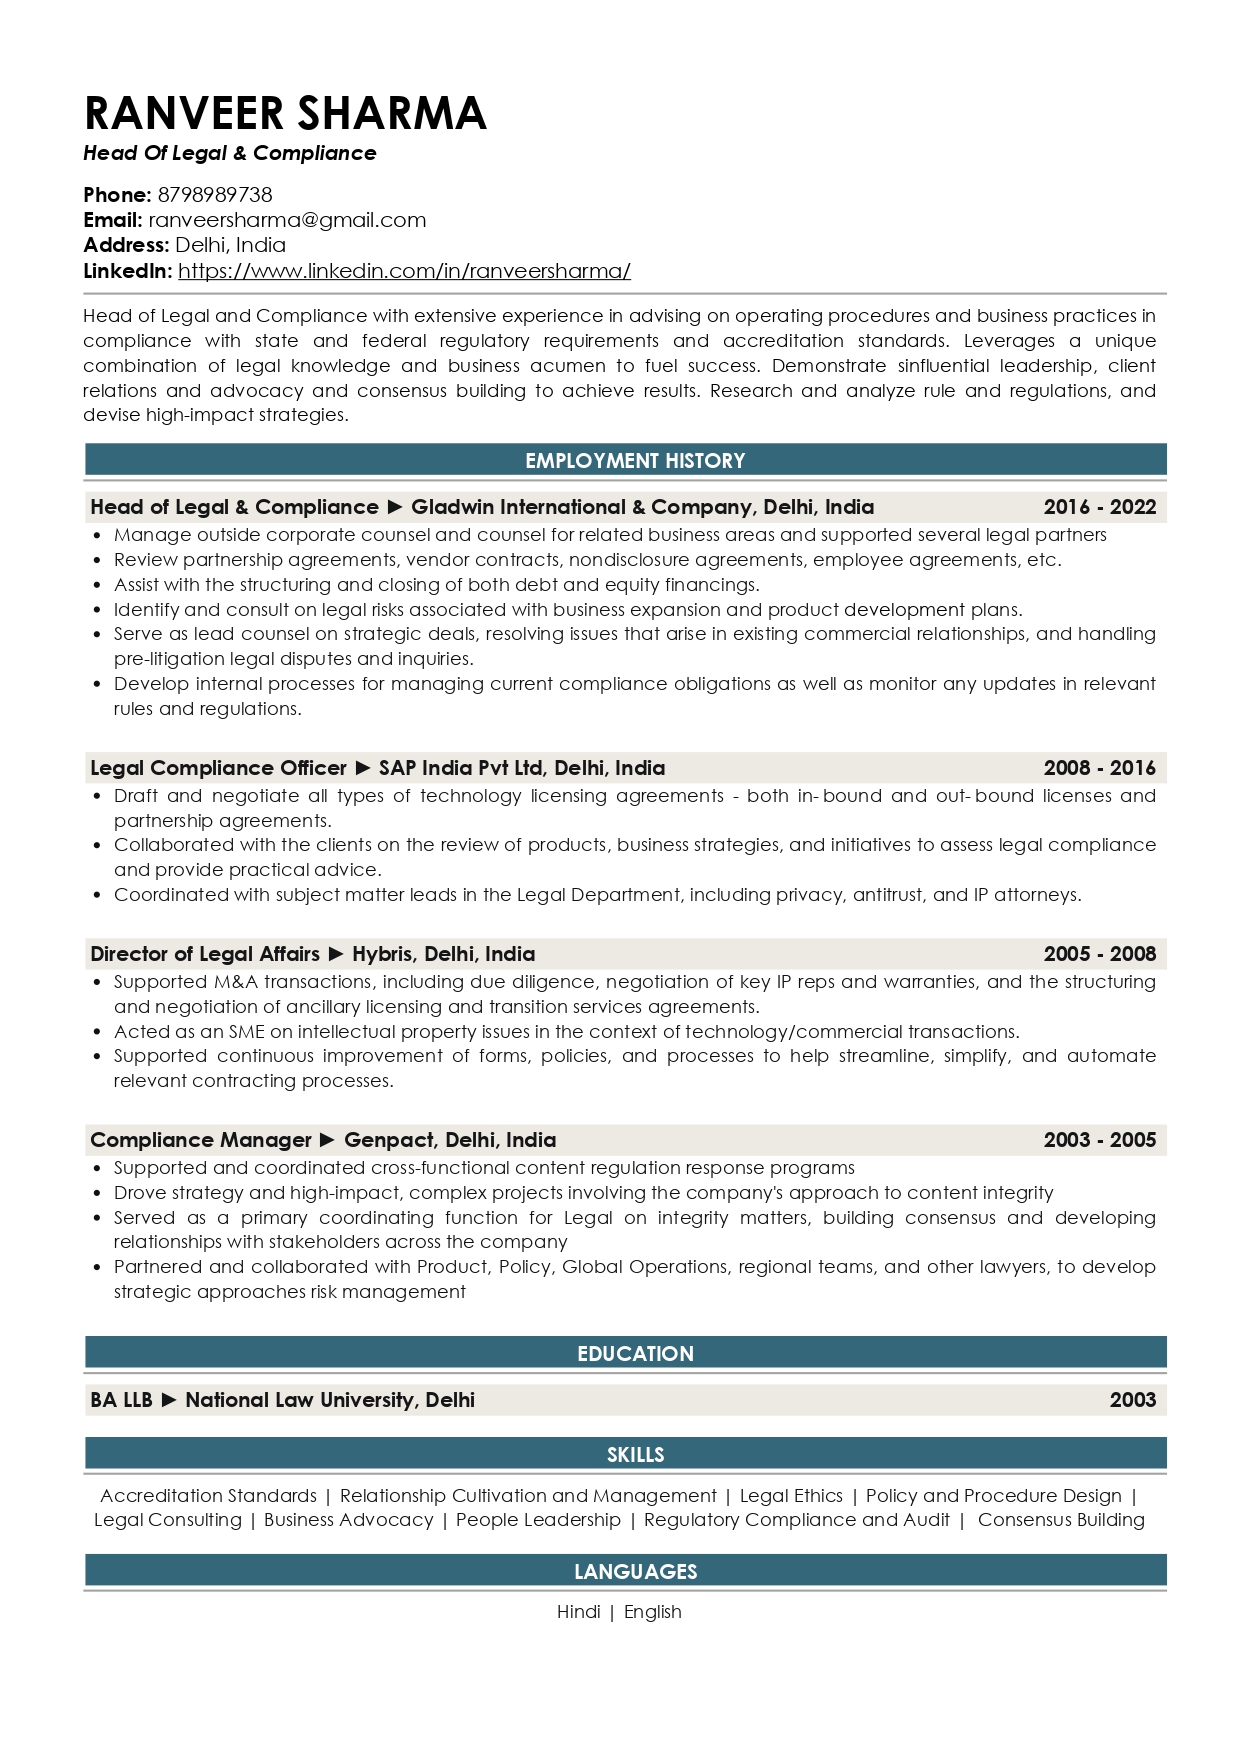 Sample Resume Of Head of Legal Compliance | Free Resume Templates & Samples on Resumod.co